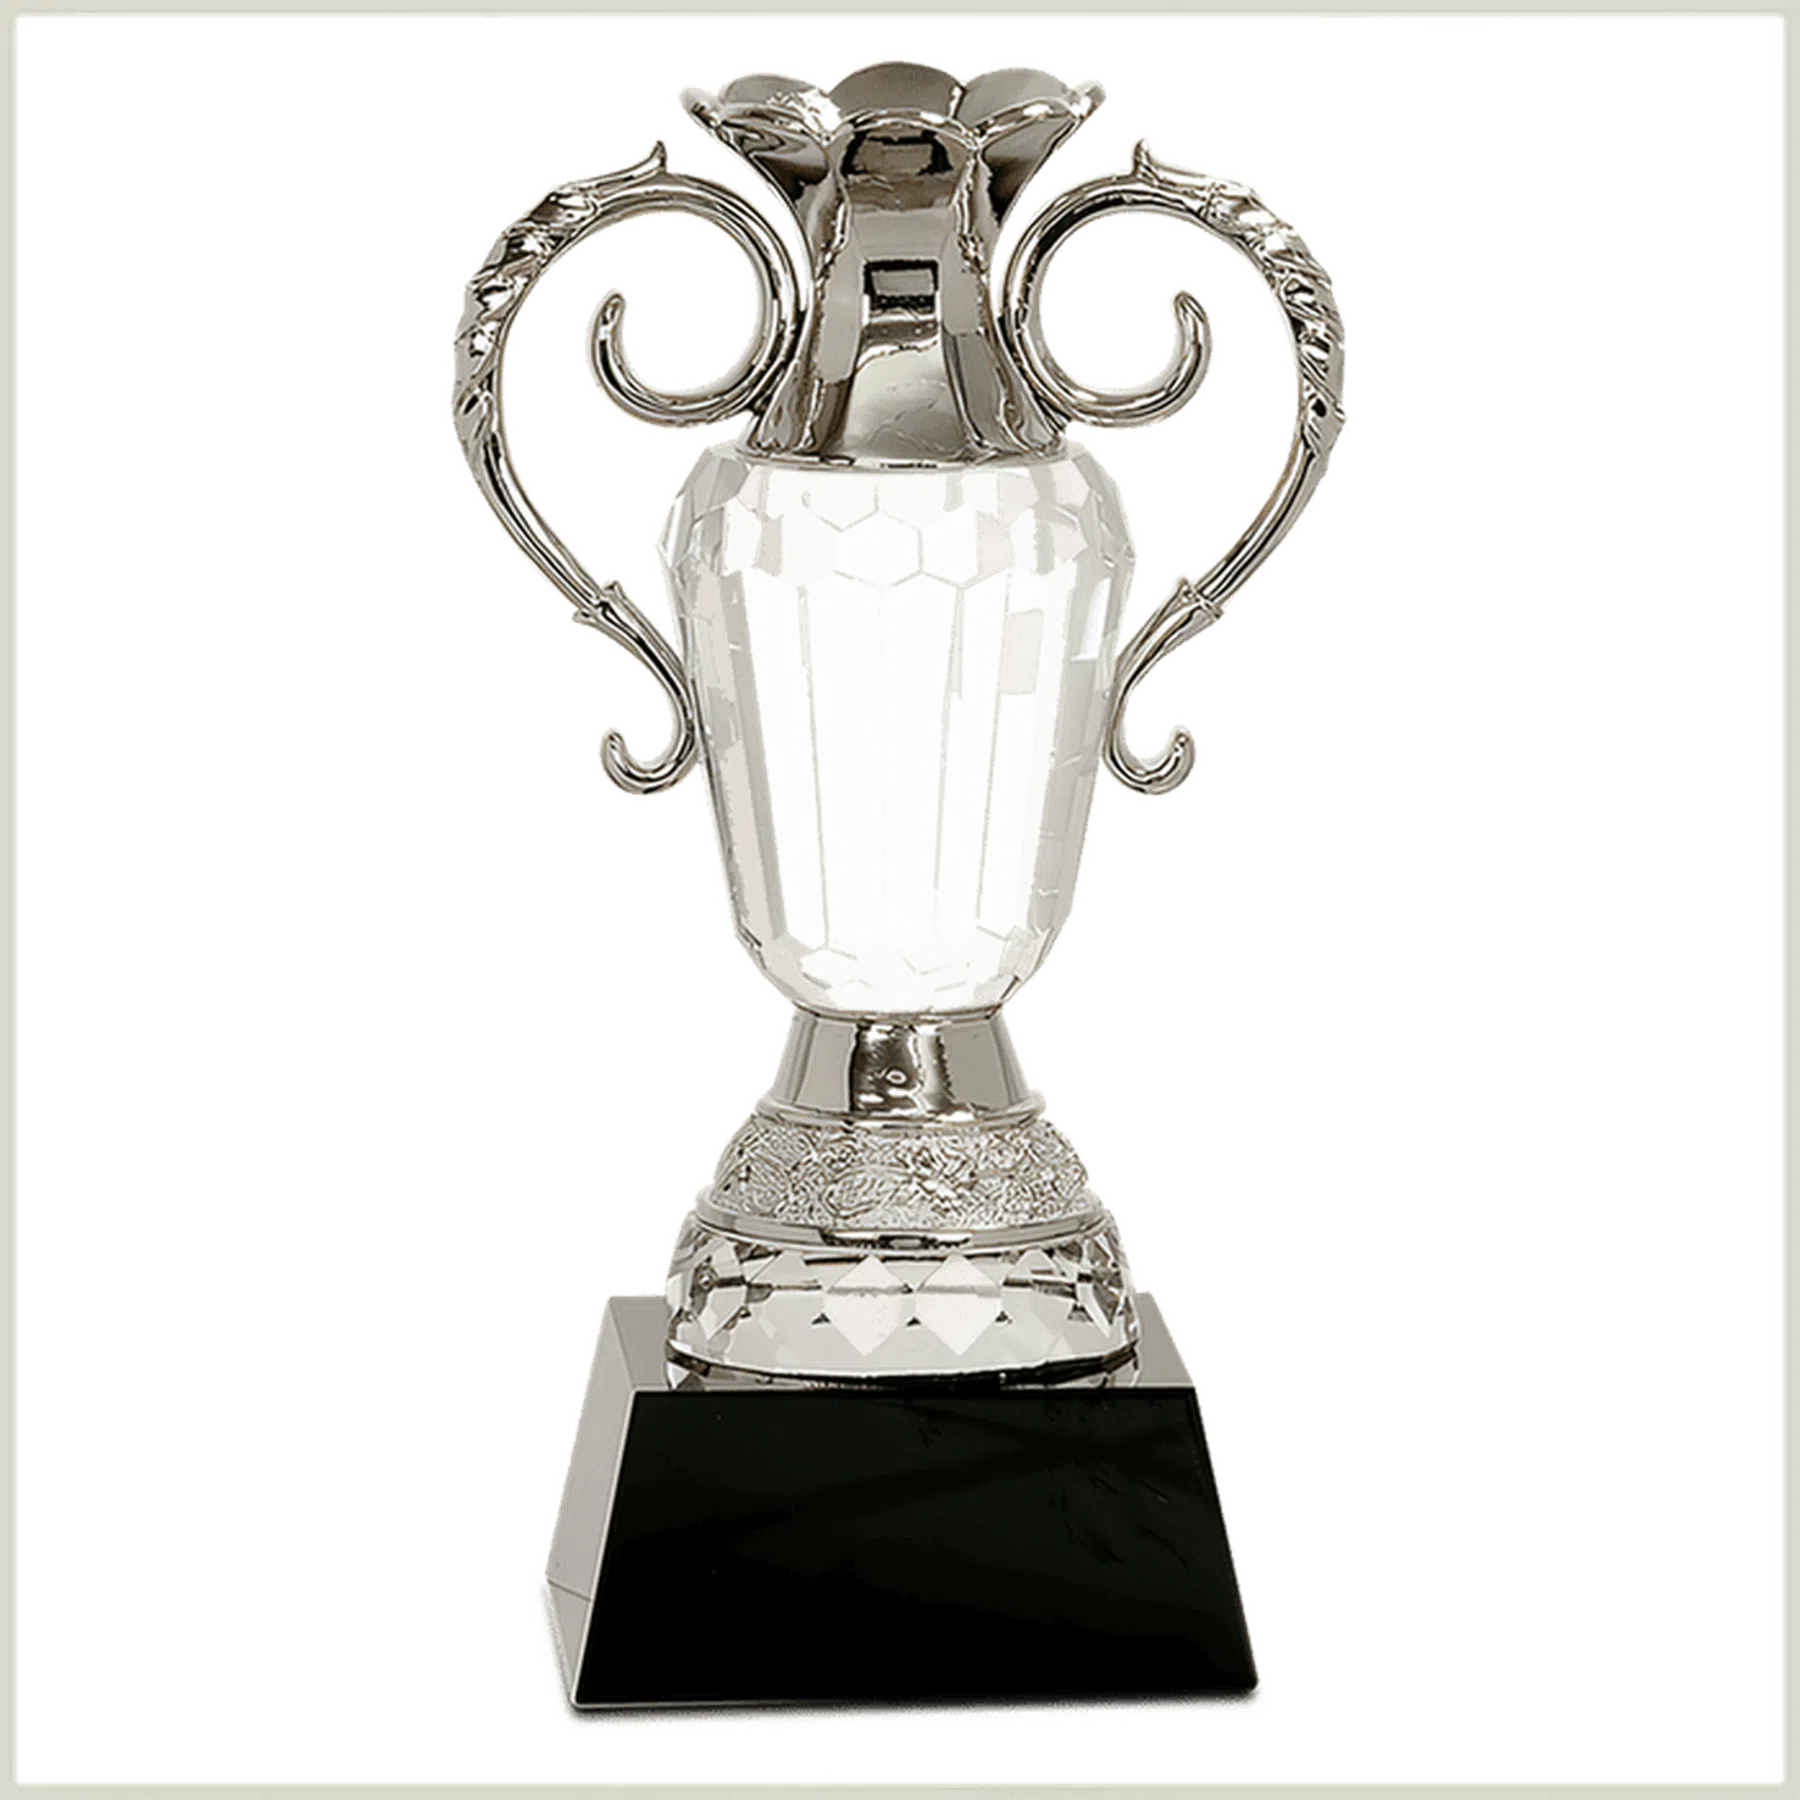 Crystal Trophy Cup with Silver Metal Handles